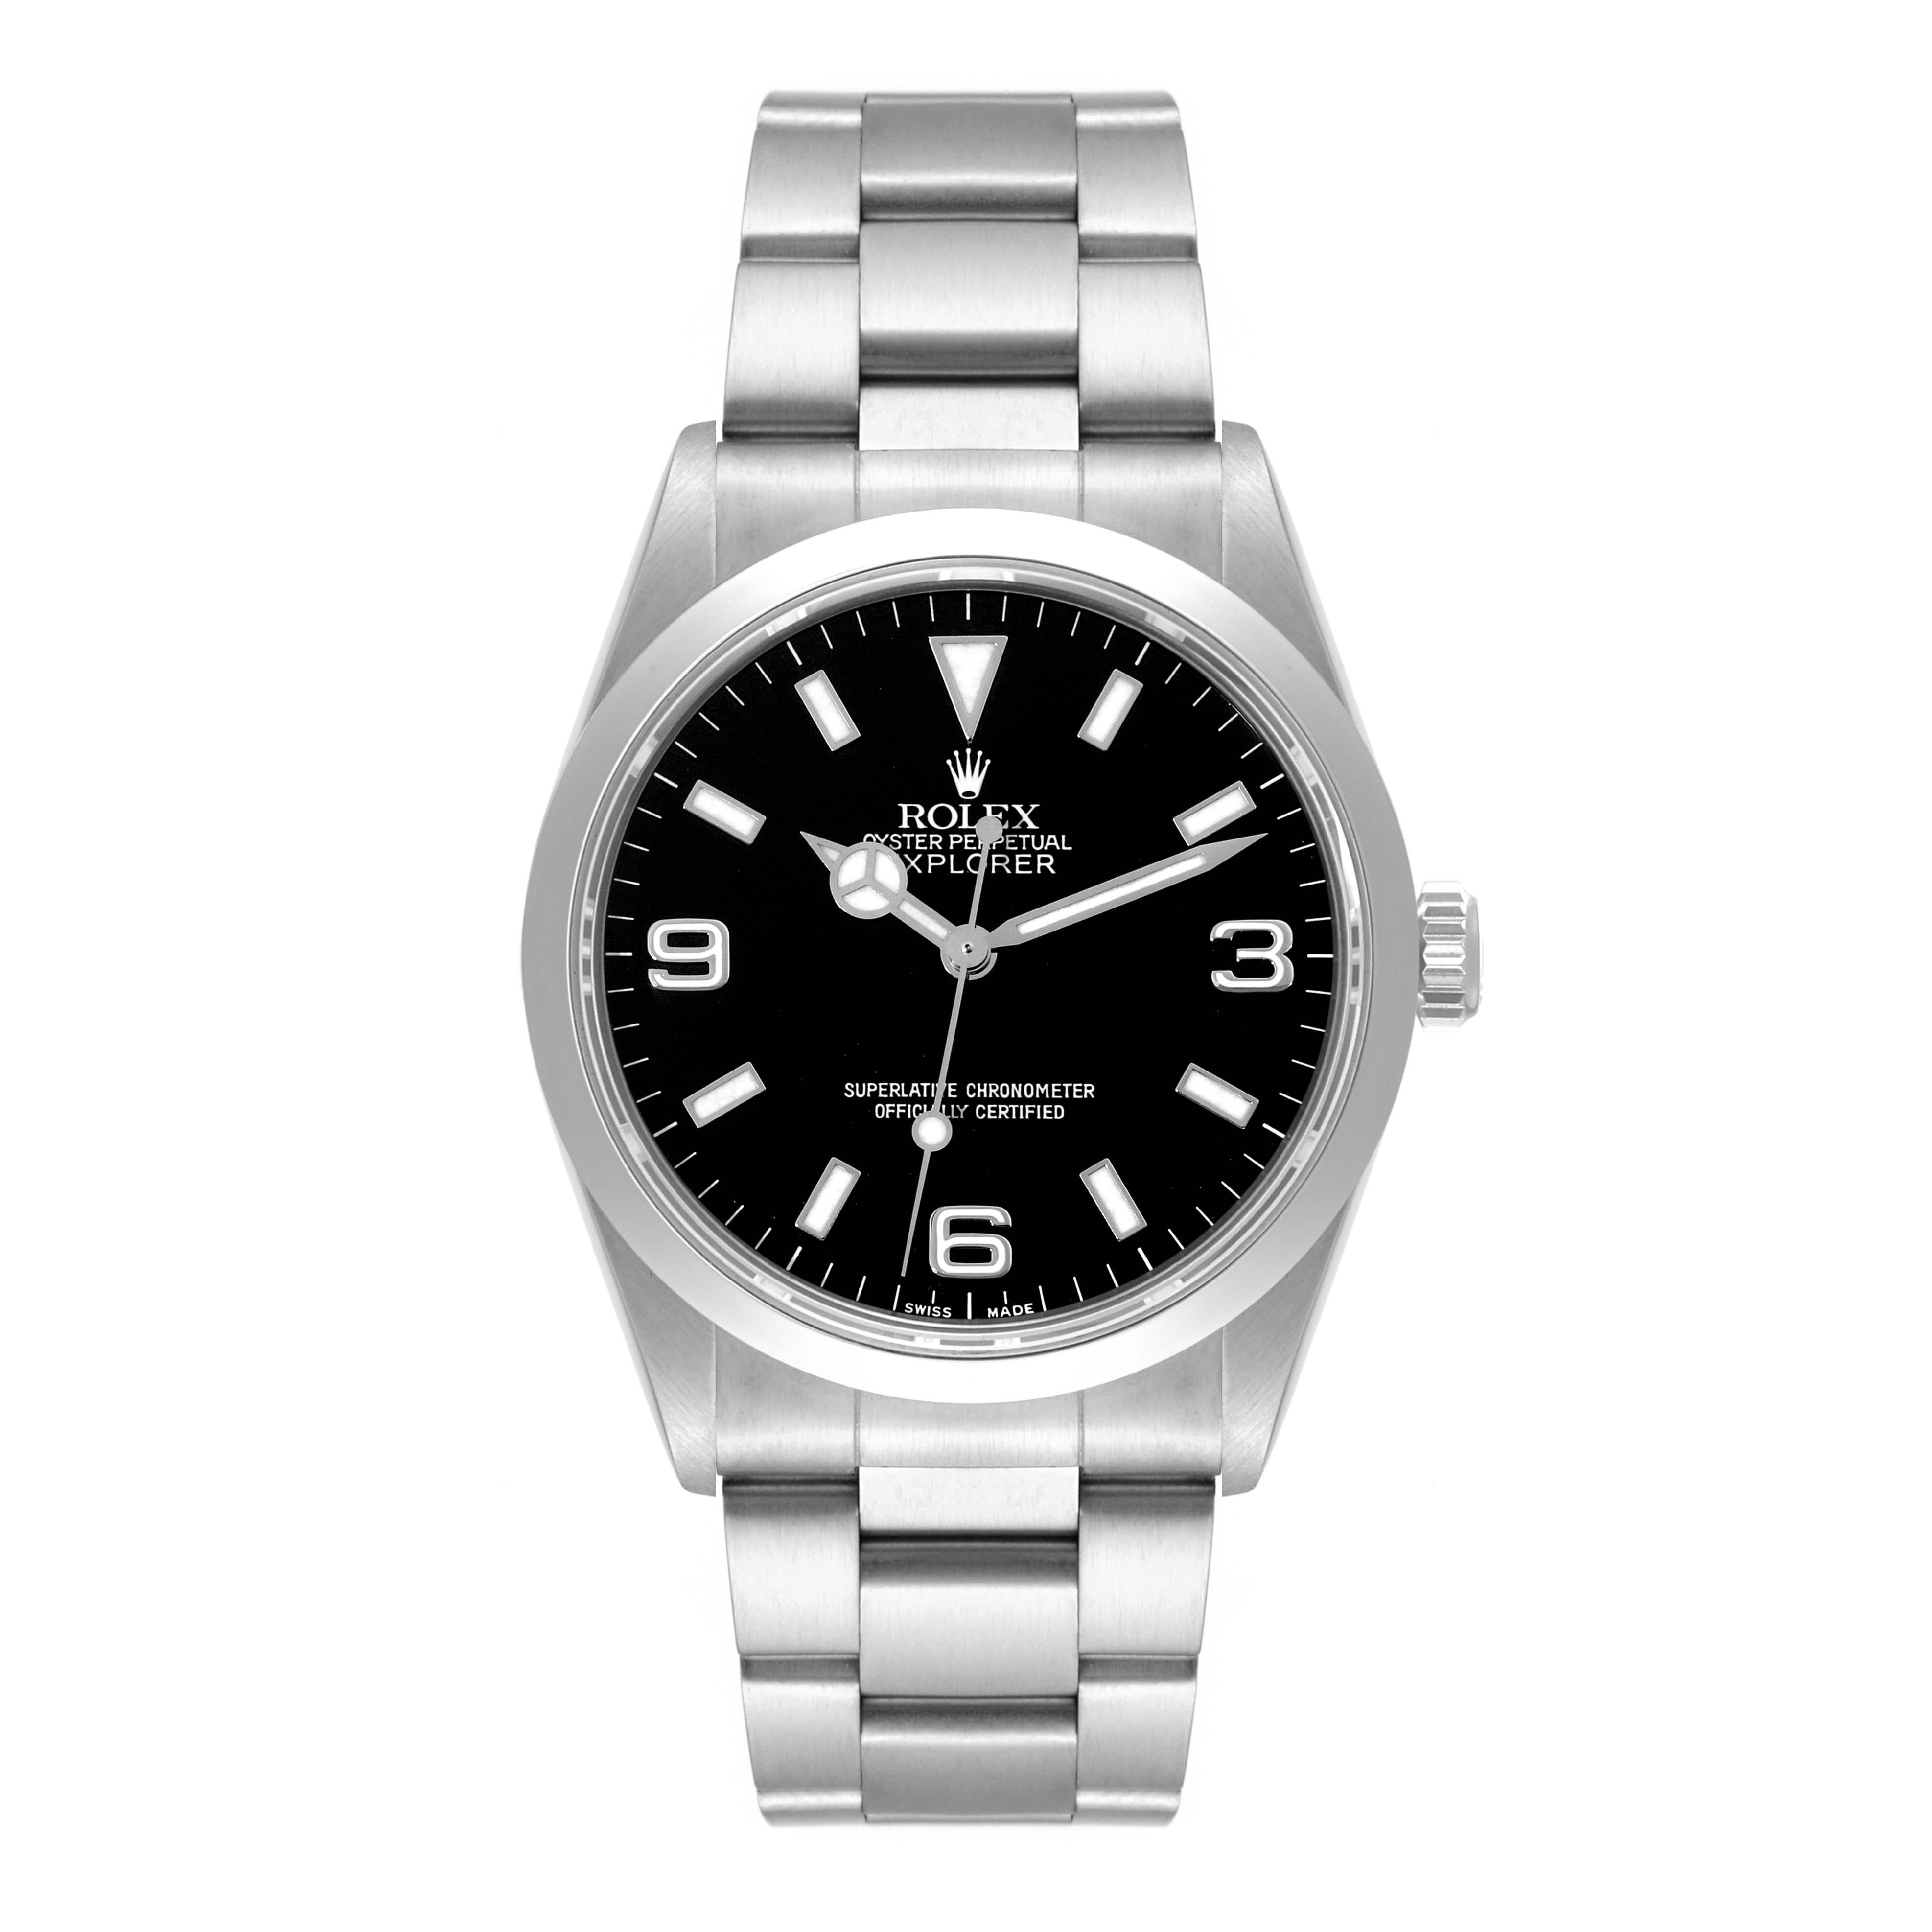 Rolex Explorer I Black Dial Steel Mens Watch 14270 Box Papers. Officially certified chronometer automatic self-winding movement. Stainless steel case 36.0 mm in diameter. Rolex logo on a crown. Stainless steel smooth domed bezel. Scratch resistant